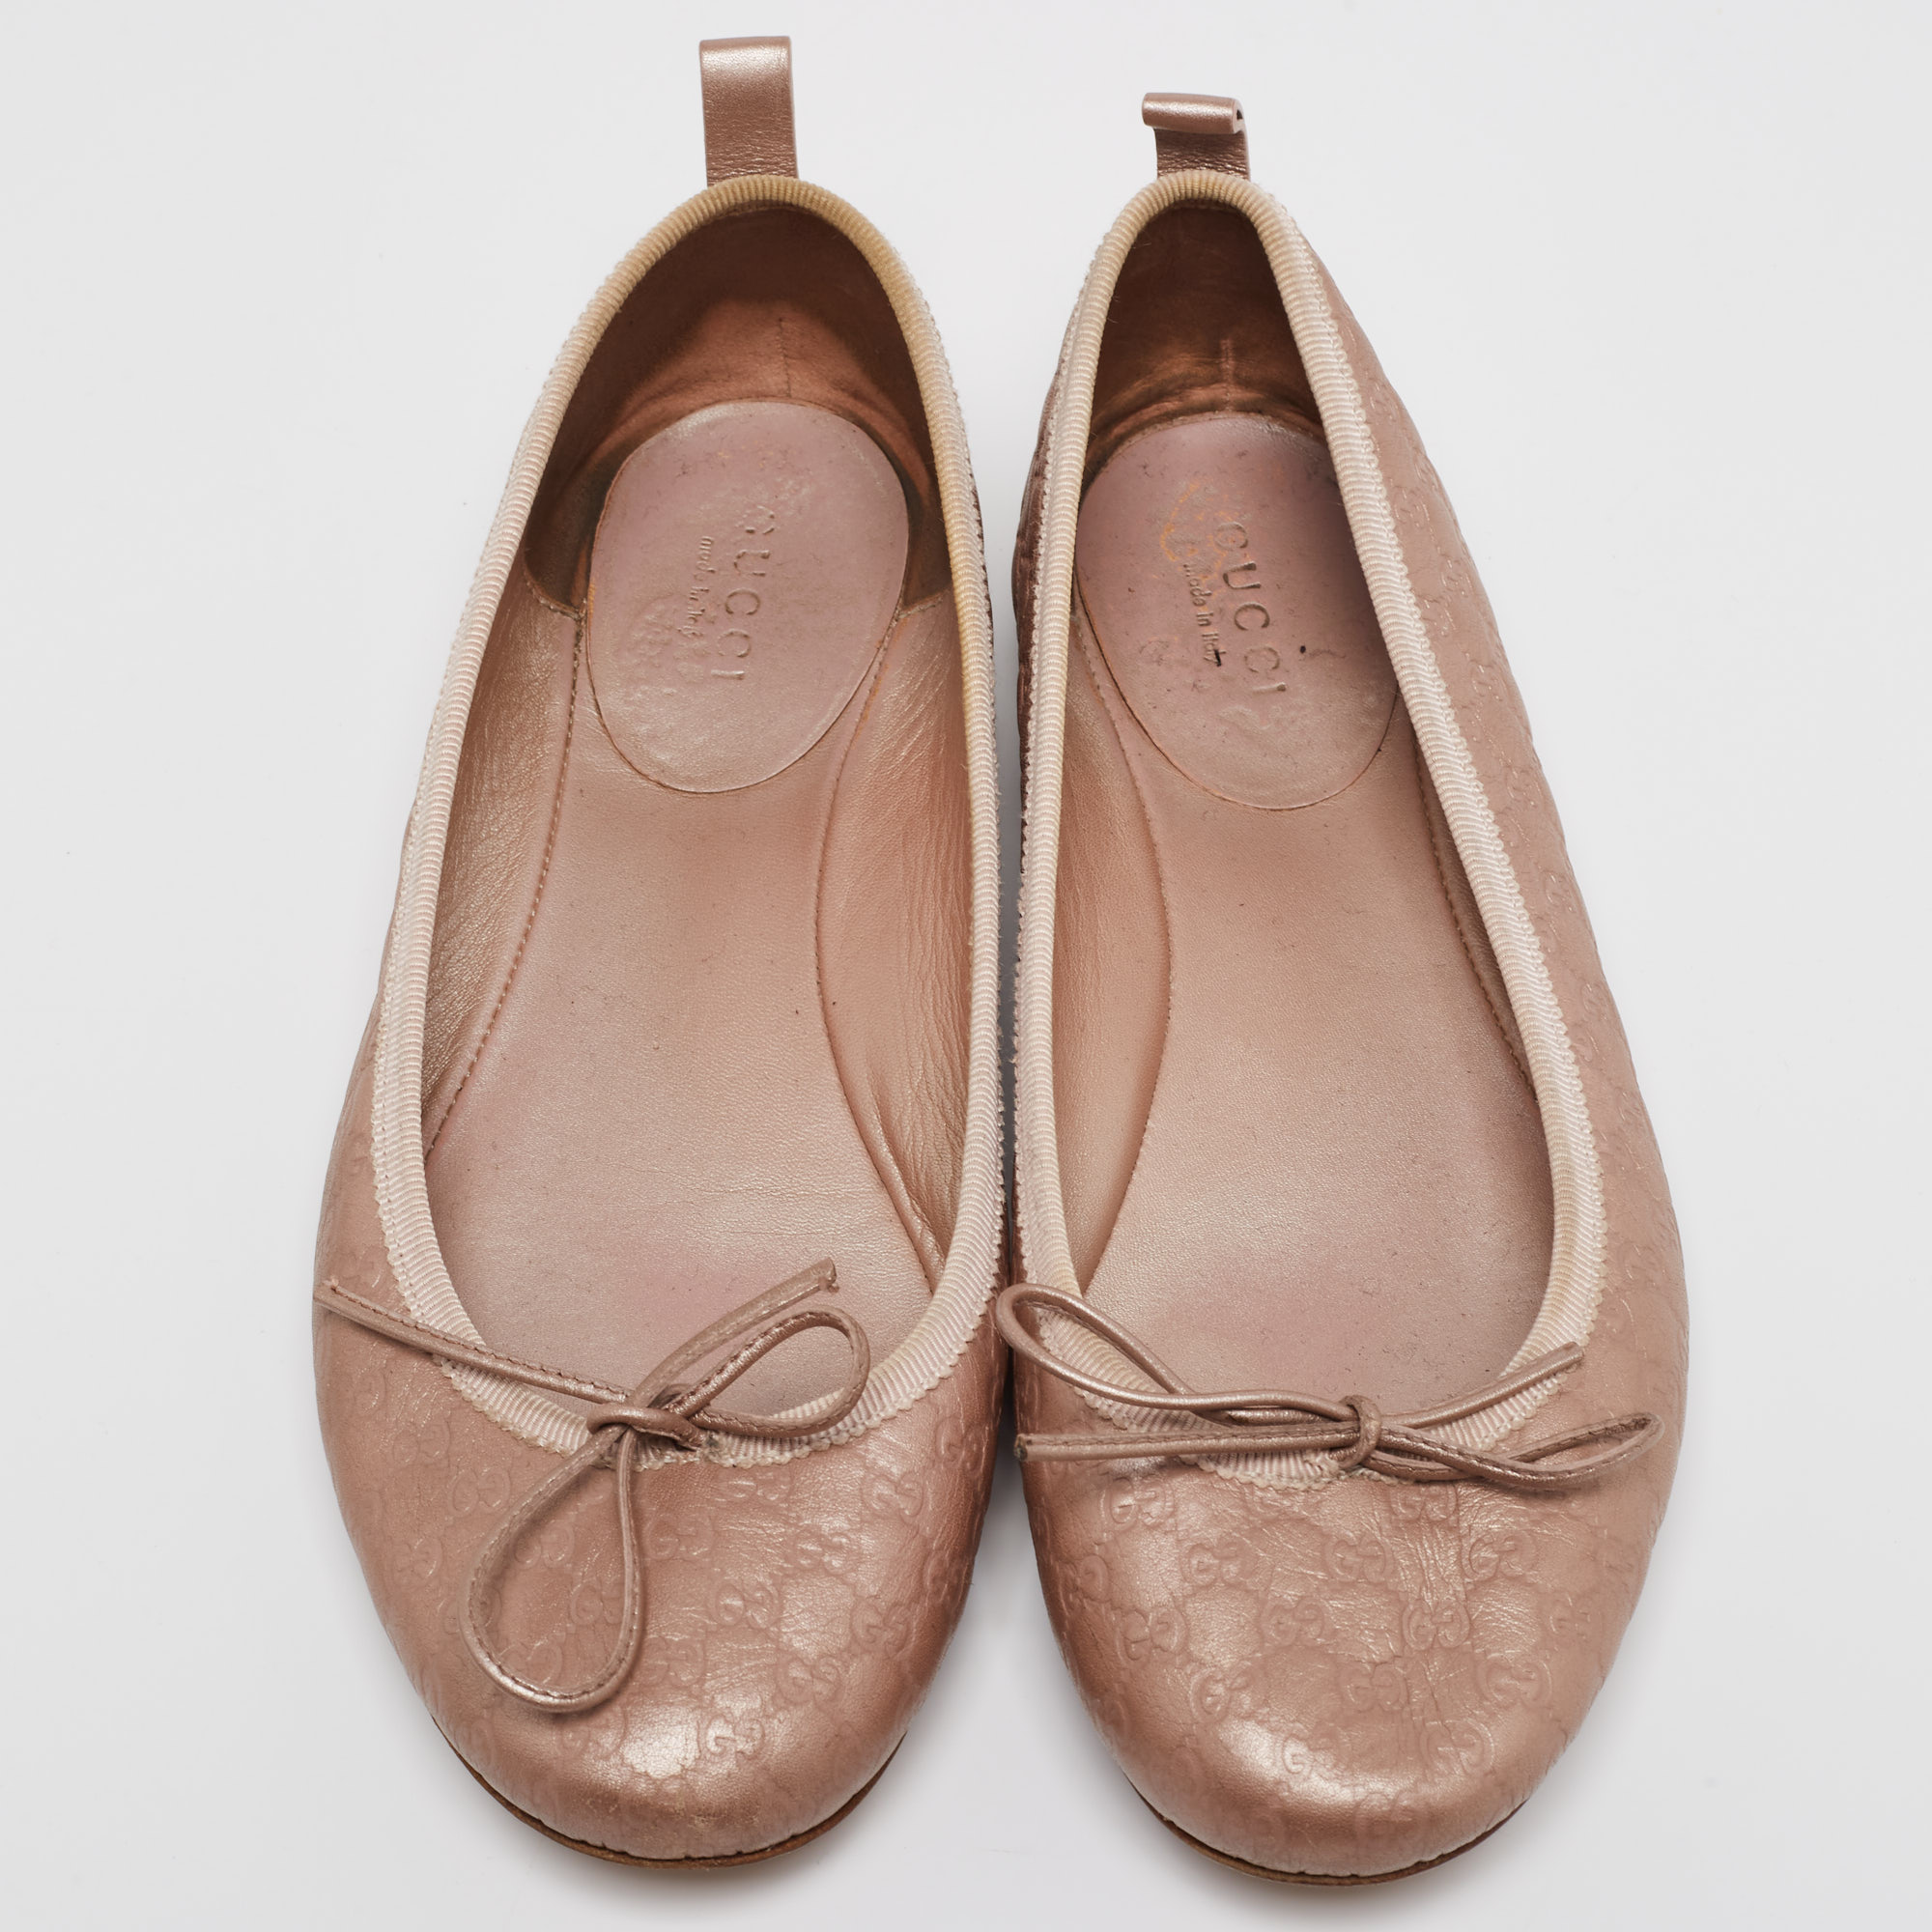 Gucci Metallic Rose Gold  Guccissima  Leather Bow Detail Ballet Flats Size 35